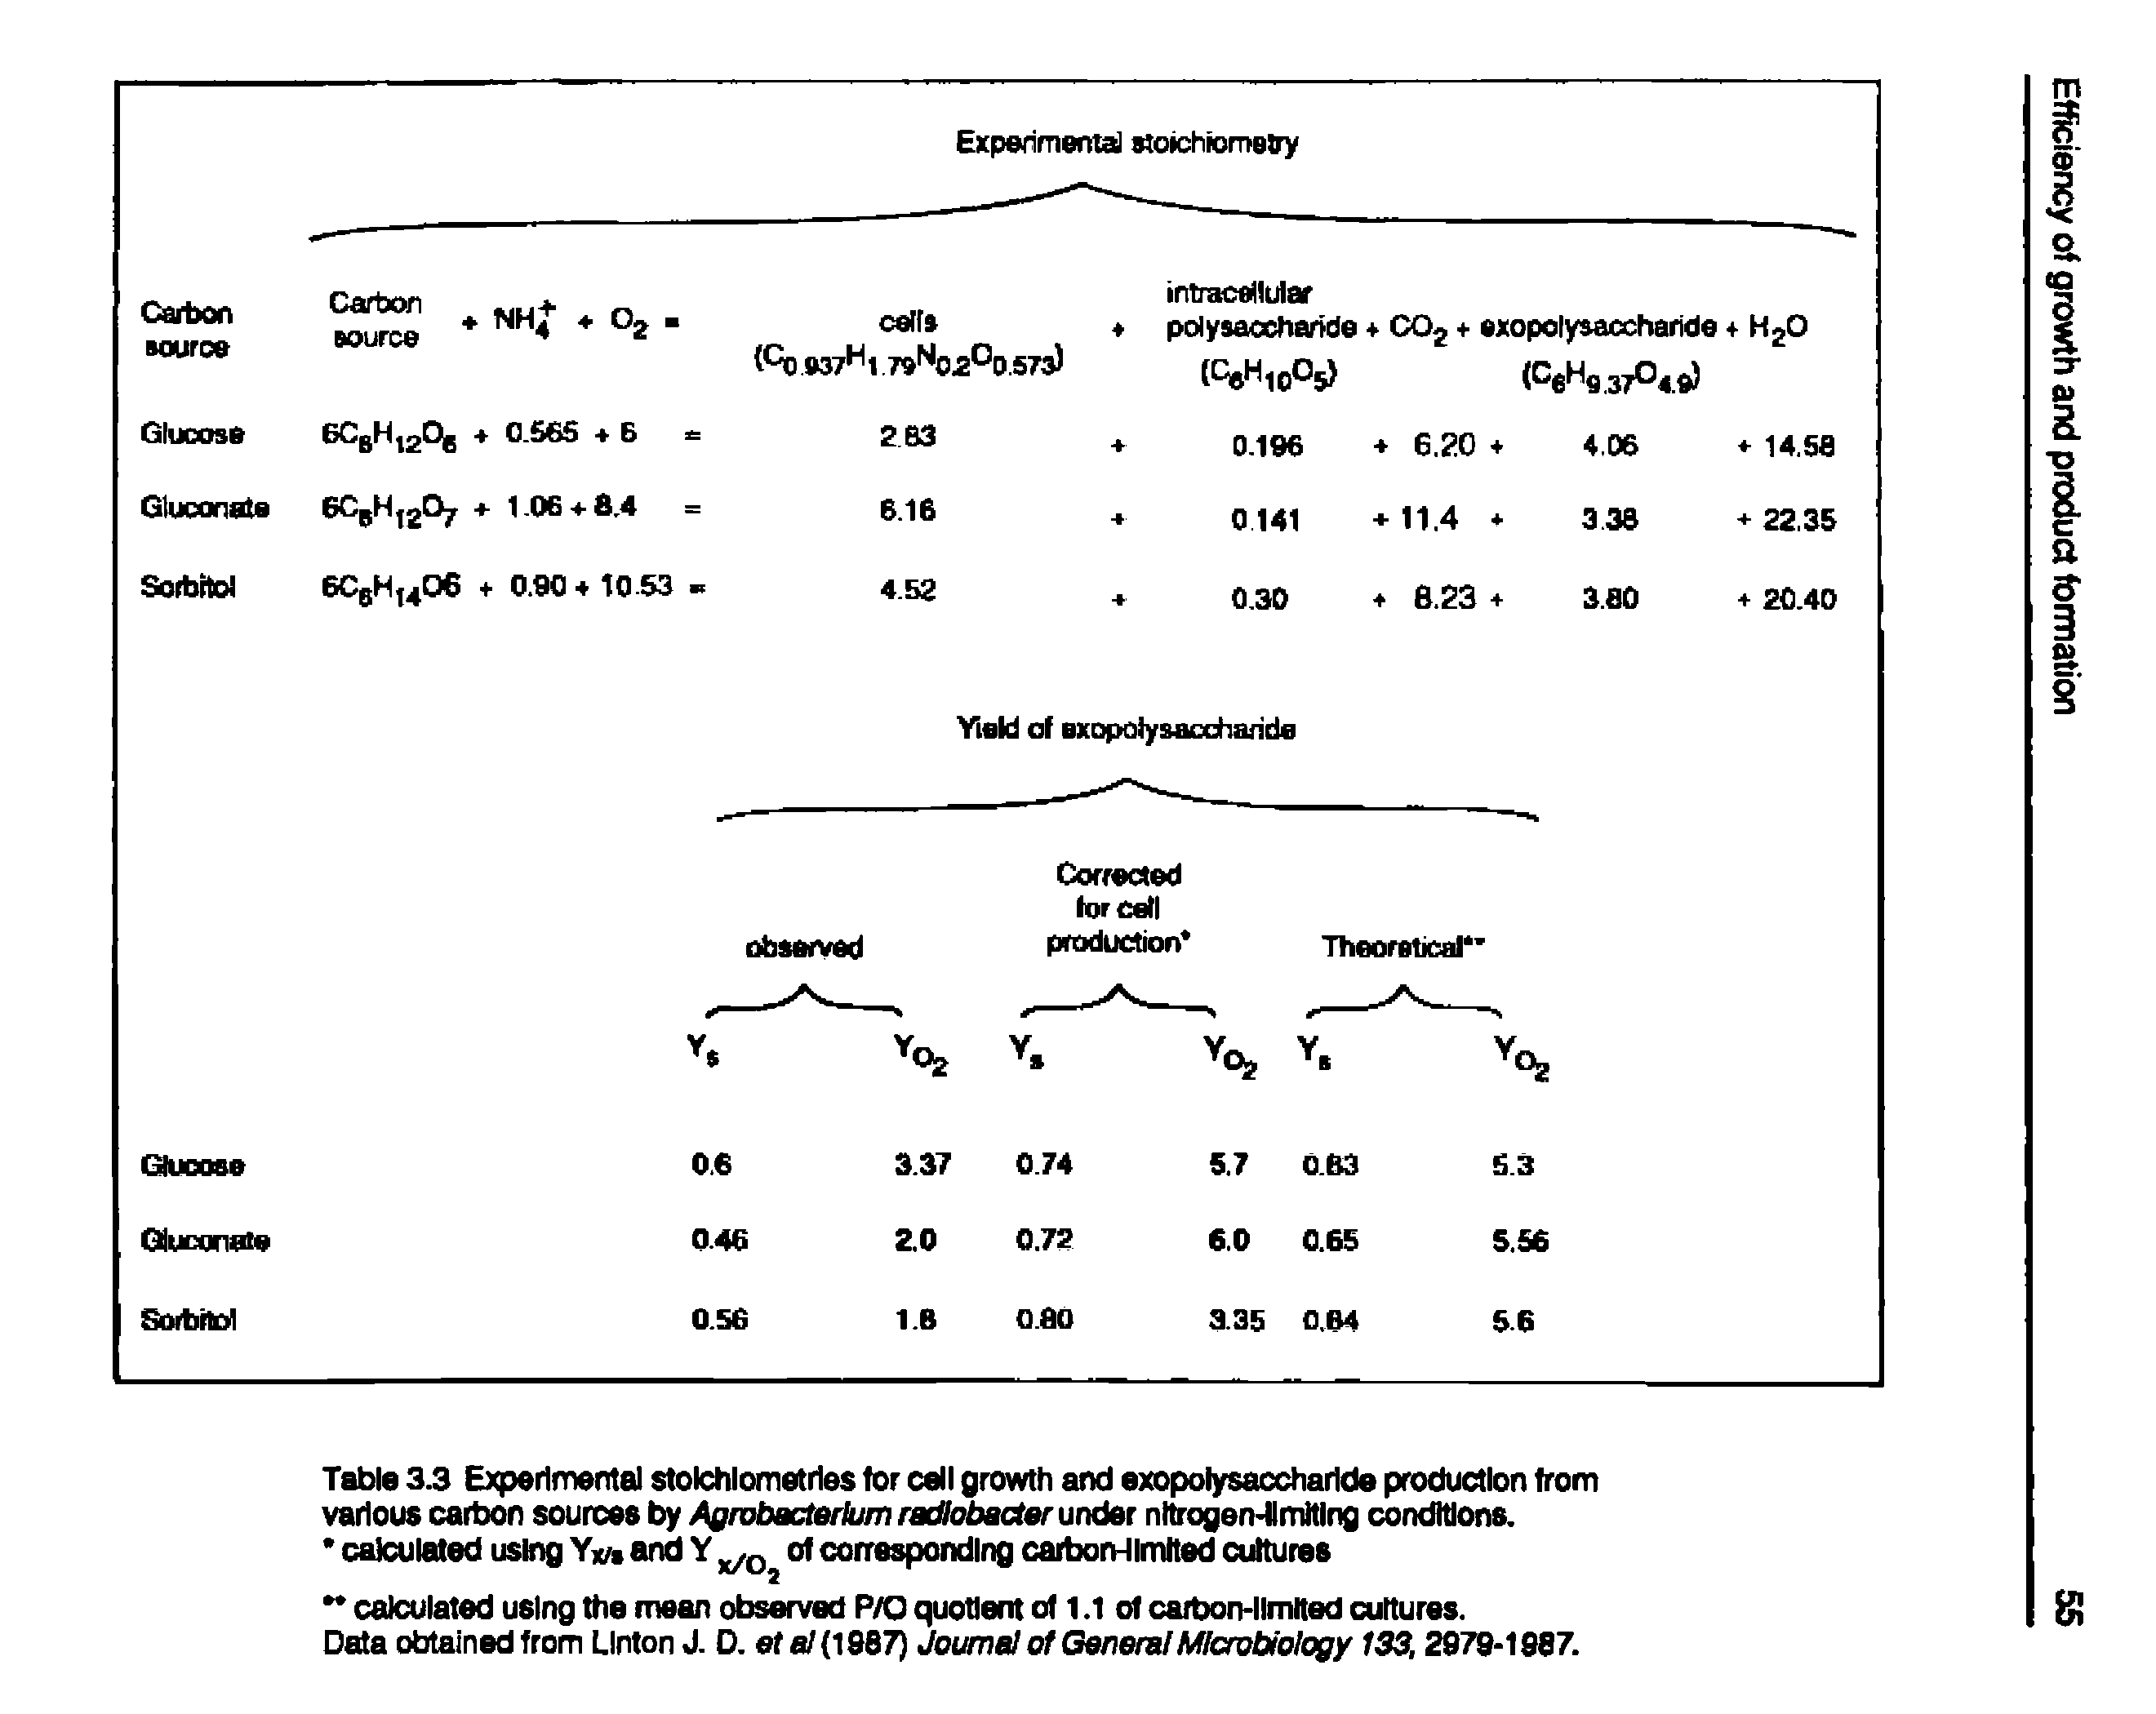 Table 3.3 Experimental stoichiometries for cell growth and exopolysaccharide production from various carbon sources by Agrvbacterhim radlobacter under nitrogen-limiting conditions.